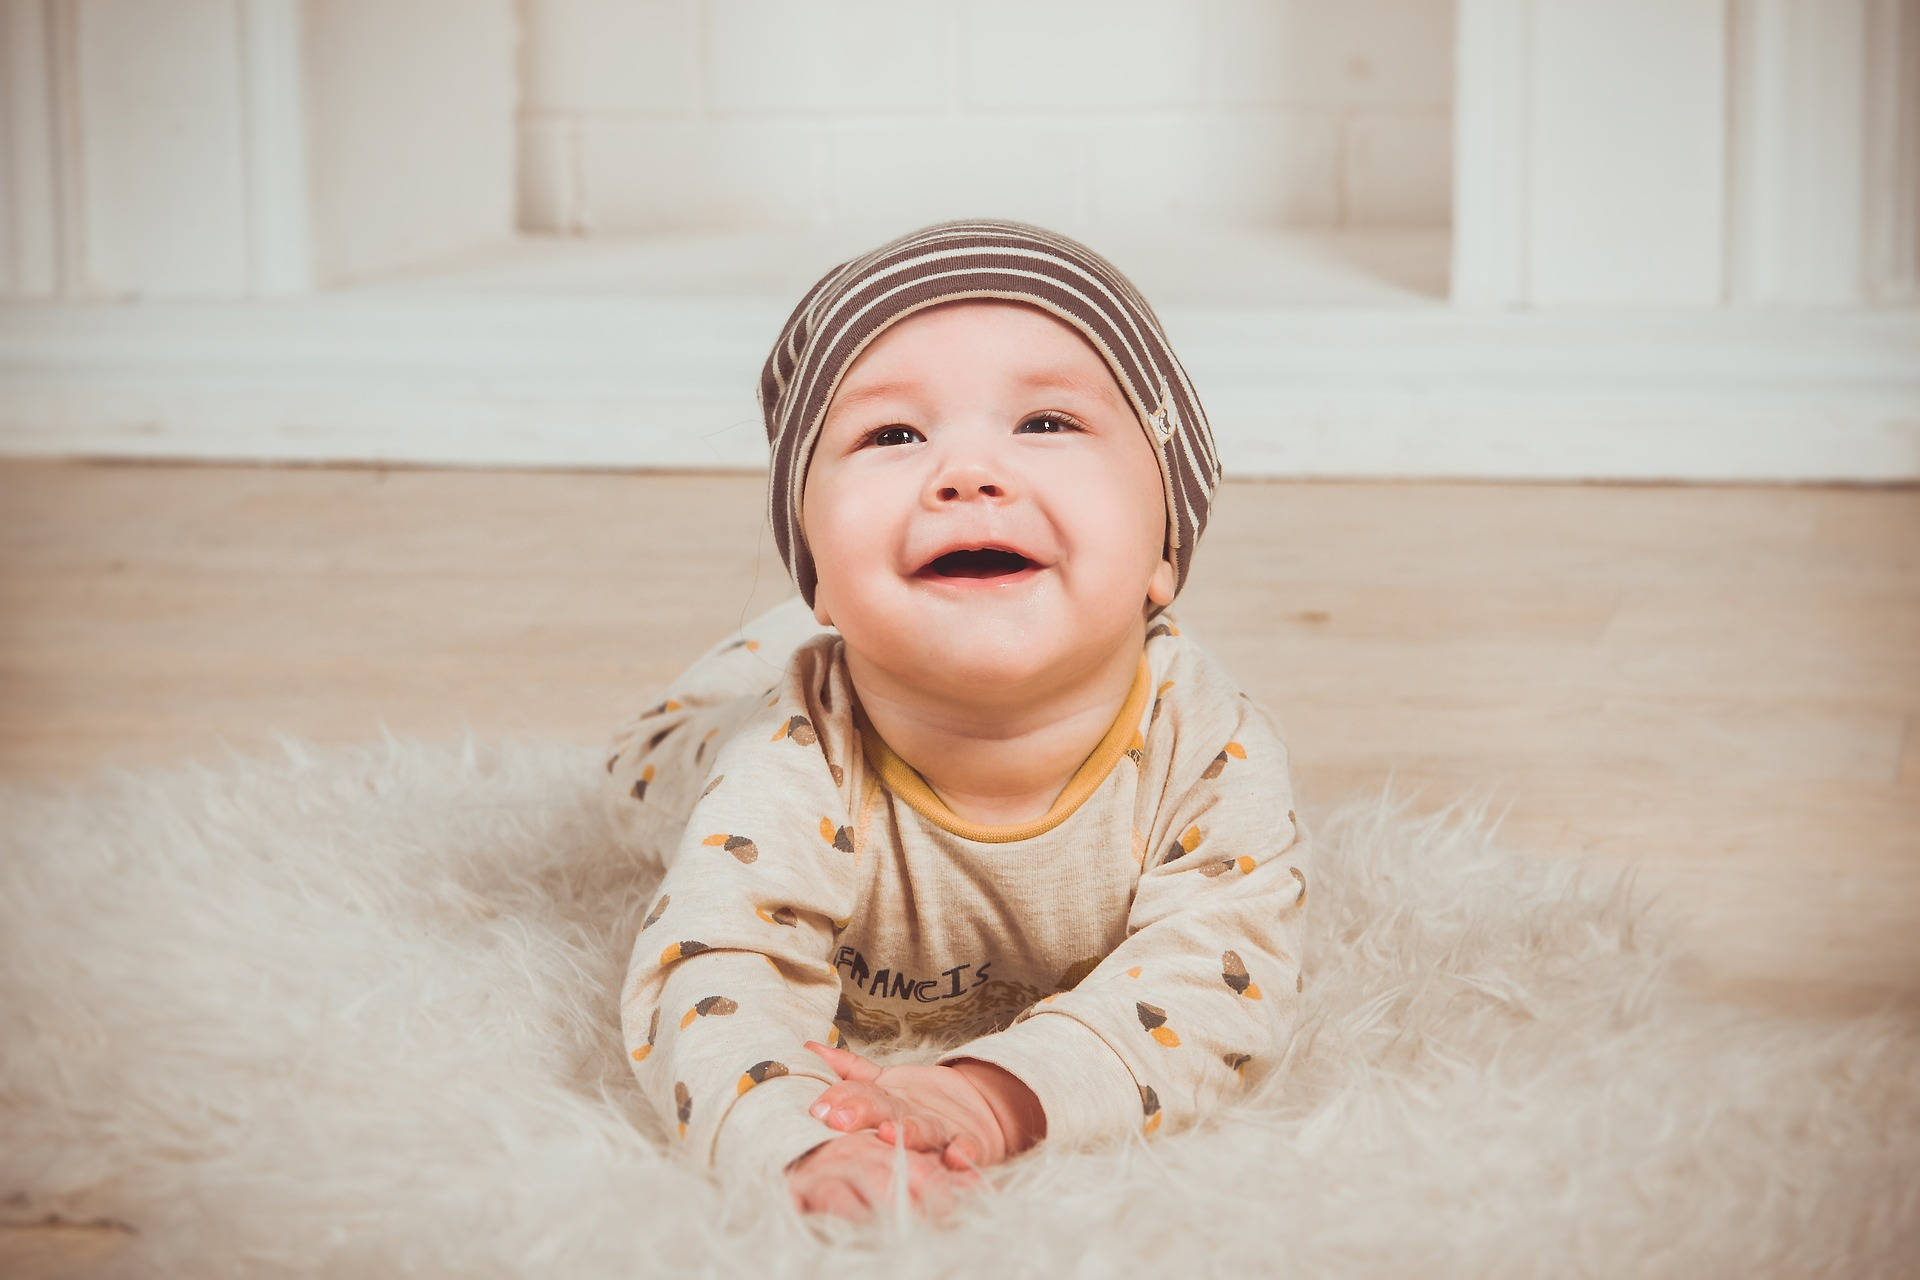 Very Cute Baby On Fluffy Rug Background